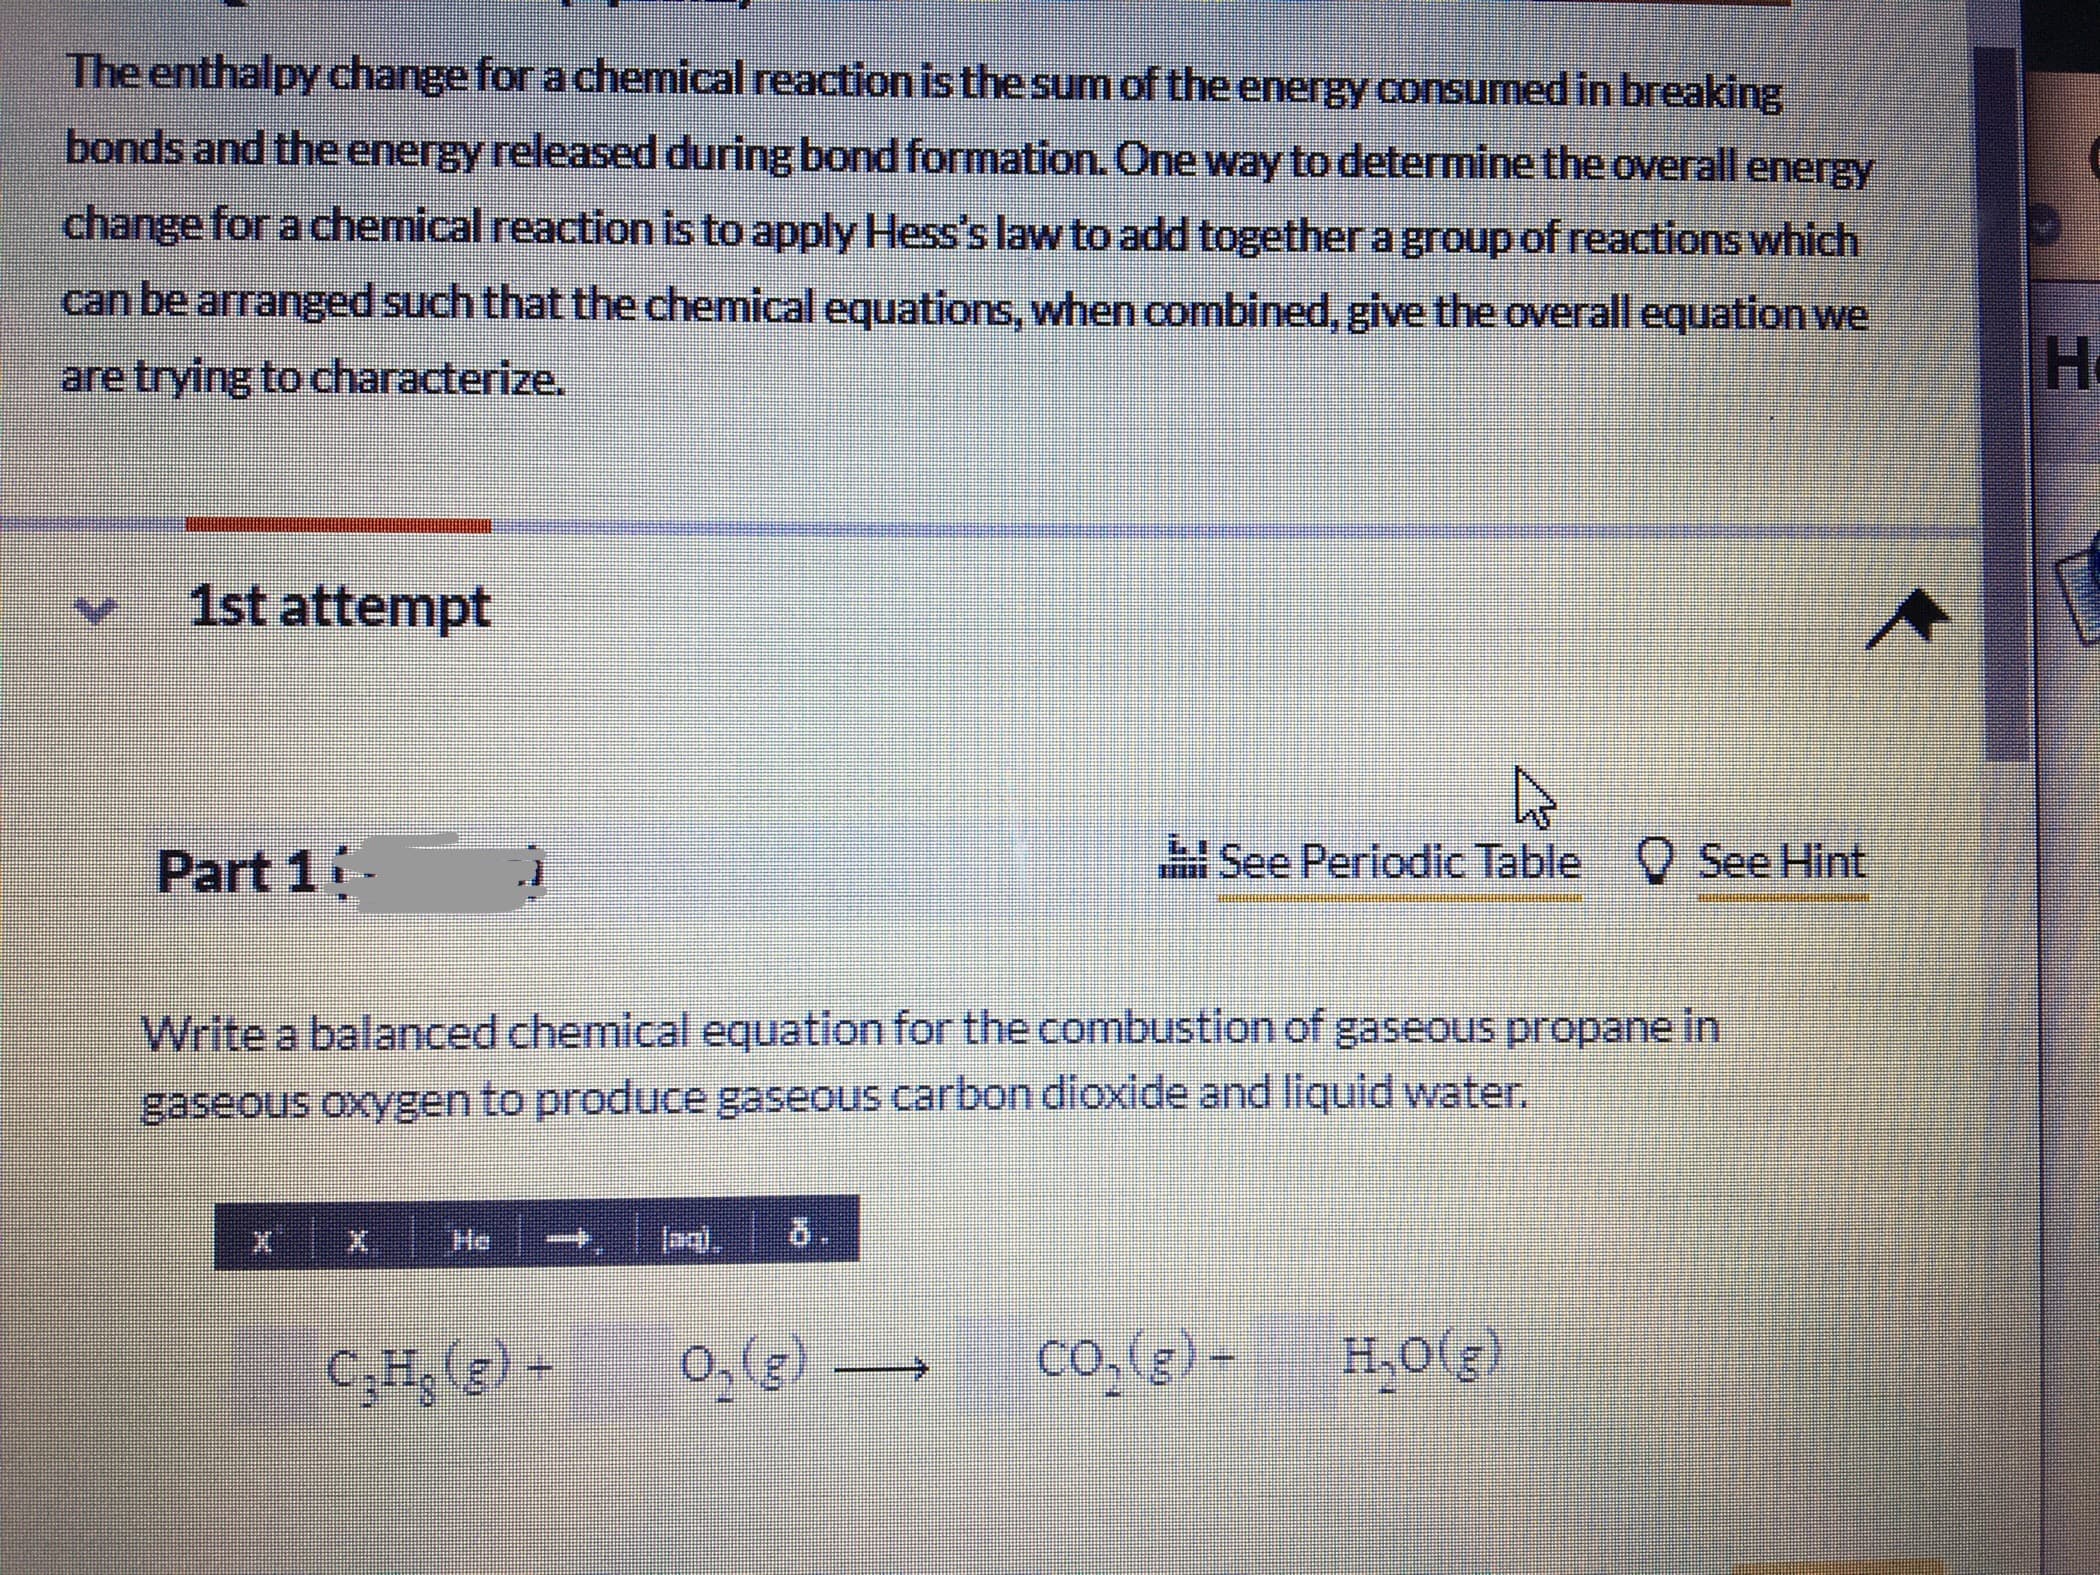 The enthalpy change for a chemical reaction isthe sum of the energy consumed in breaking
bonds and the energy released during bond formation. One way to determine the overall energy
change for a chemical reaction is to apply Hess's law to add together a group of reactions which
can be arranged such that the chemical equations, when combined, give the overall equation we
are trying to characterize,
H.
1st attempt
Part 1
See Periodic Table C See Hint
Write a balanced chemical equation for the combustion of gaseous propane in
gaseous oxygen to produce gaseous carbon dioxide and liquid water.
He
5.
C;Hg (g) -
co.(g) -
H,0(g)
(3)0
